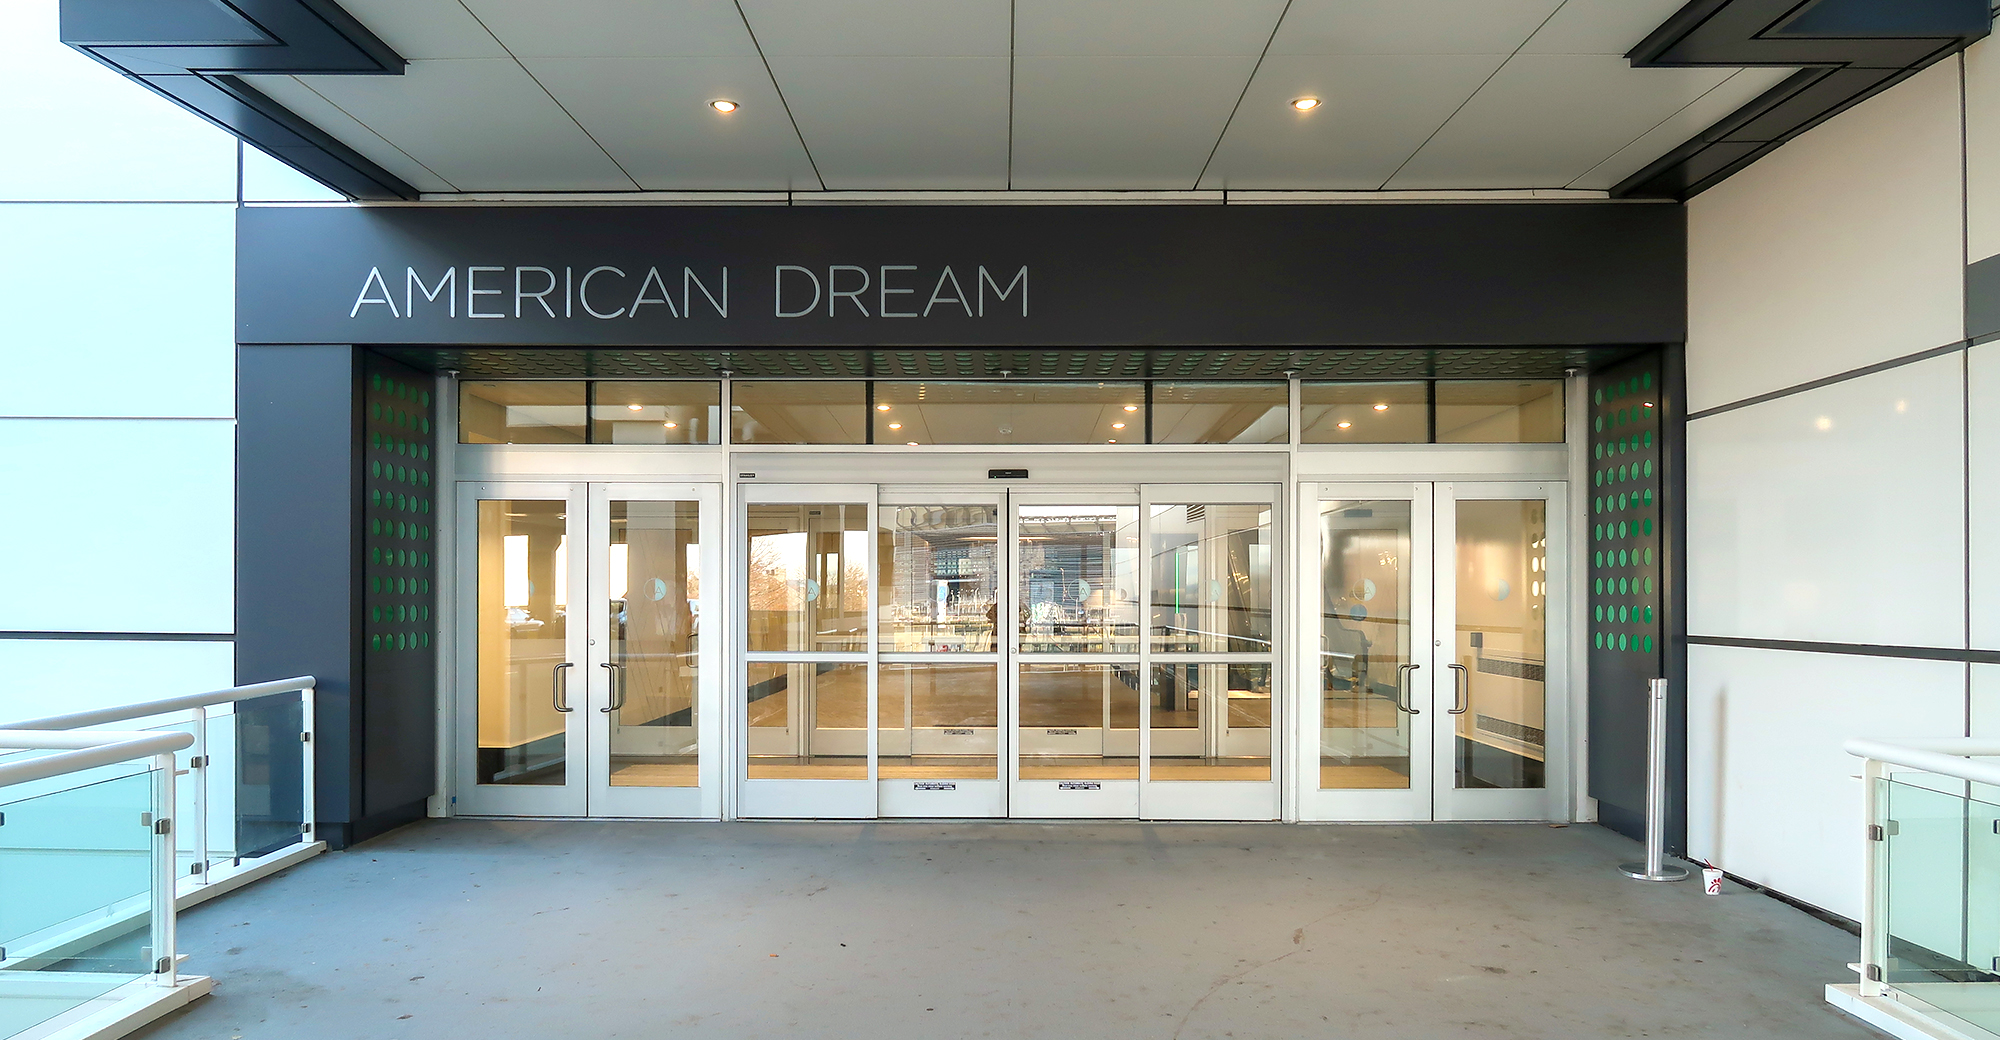 American Dream mall: A first look inside the $5 billion project